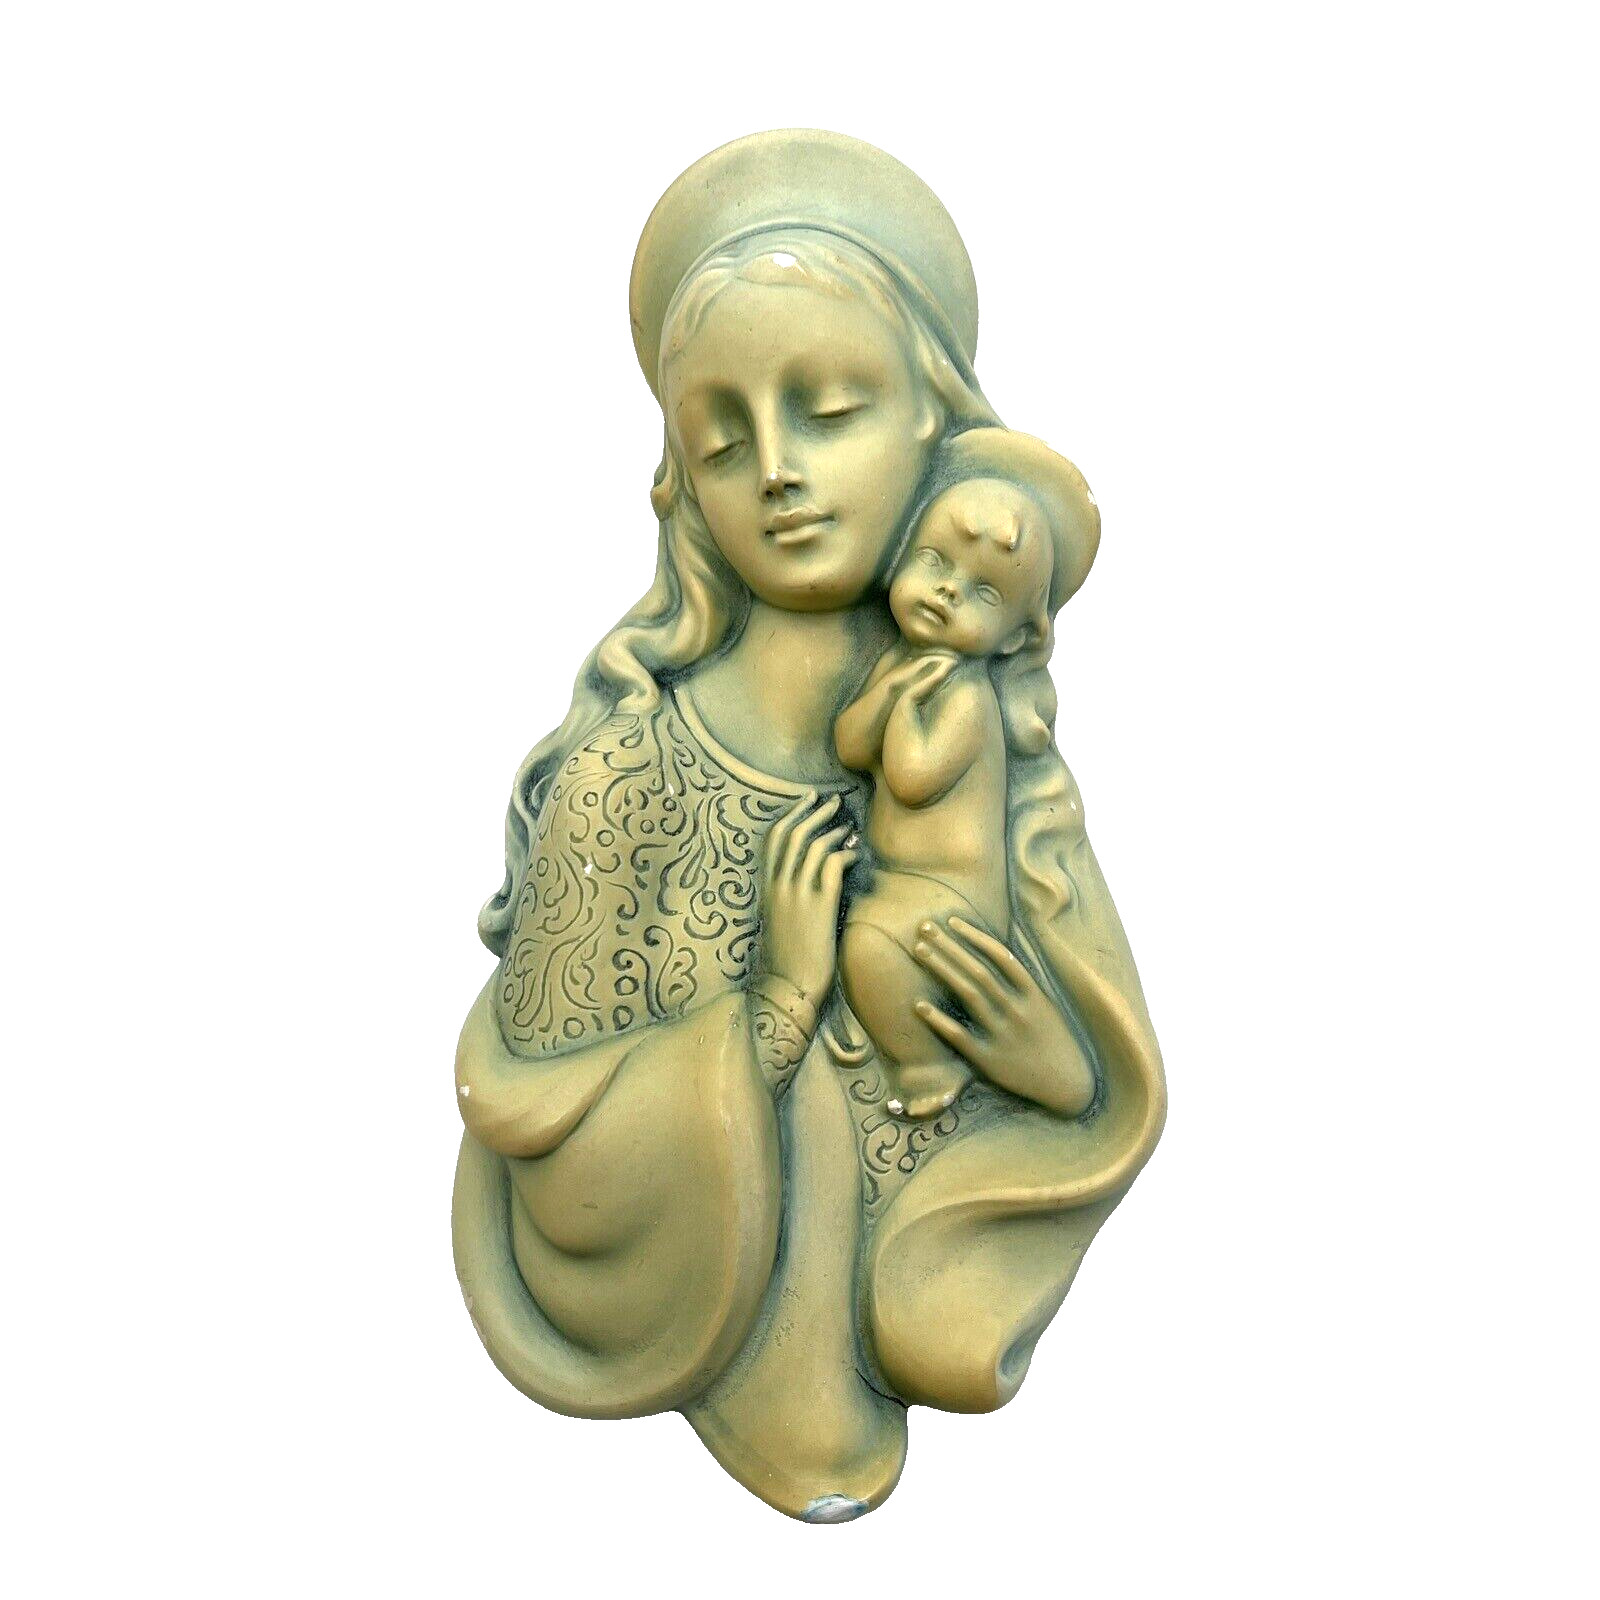 Vintage Madonna and Child Wall Plaque Chalkware Green/Blue Hues 10”x 5” C.S. 246